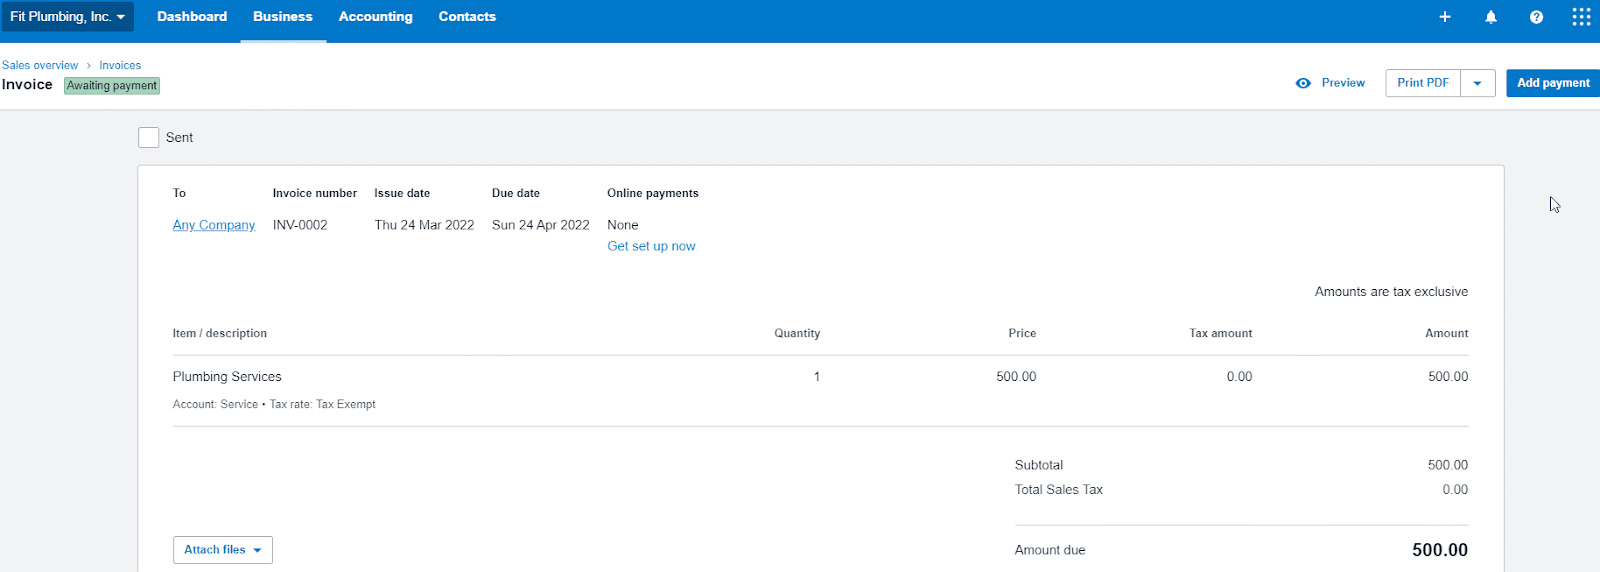 Adding a payment in Xero.